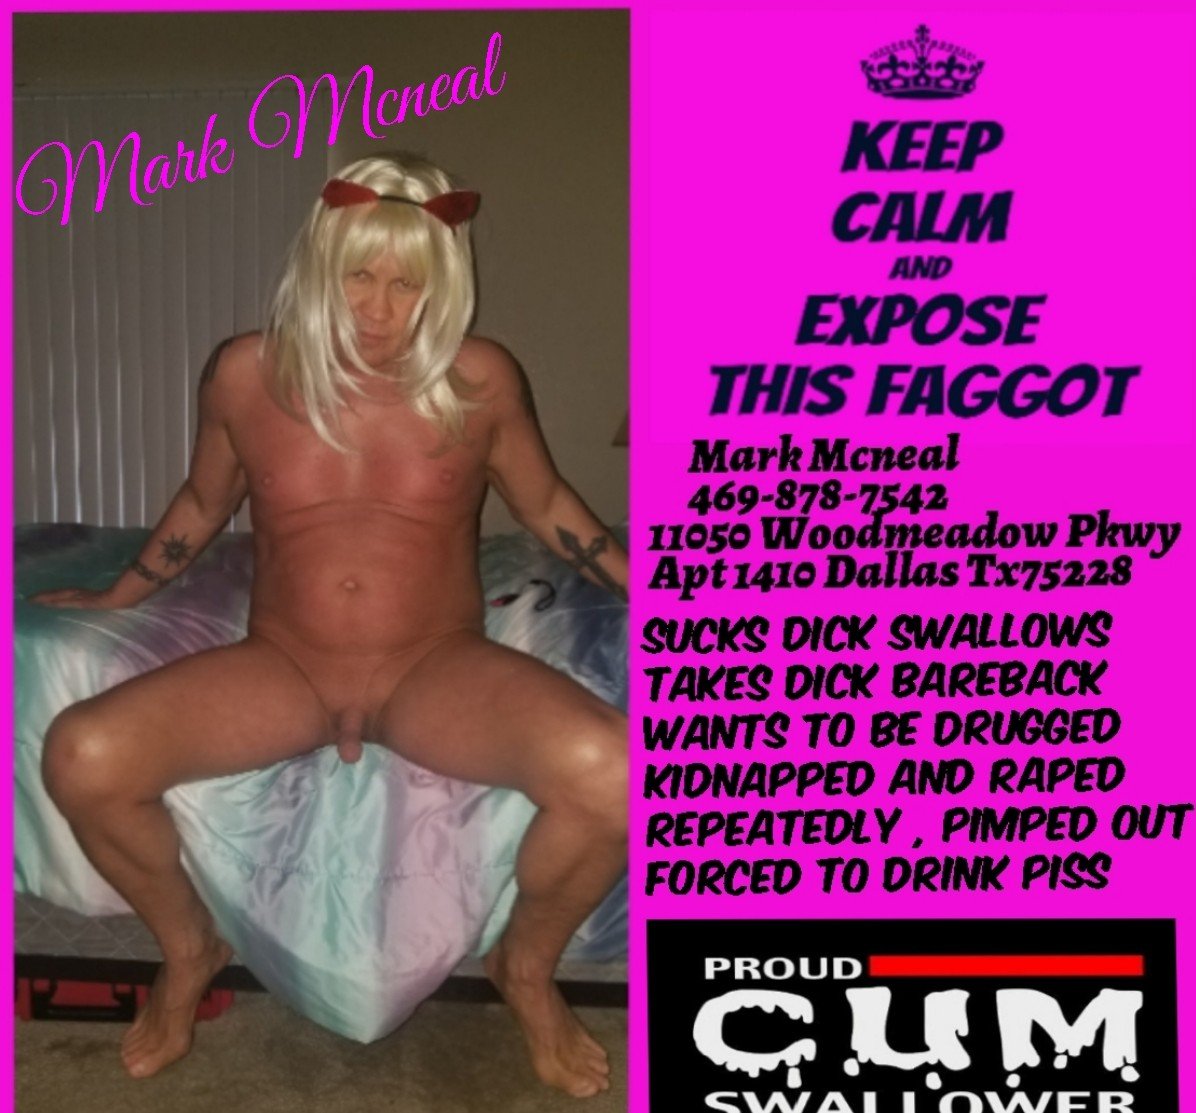 Photo by Sissyfaggot_Boy with the username @markmcnealfag2expose, posted on August 7, 2019